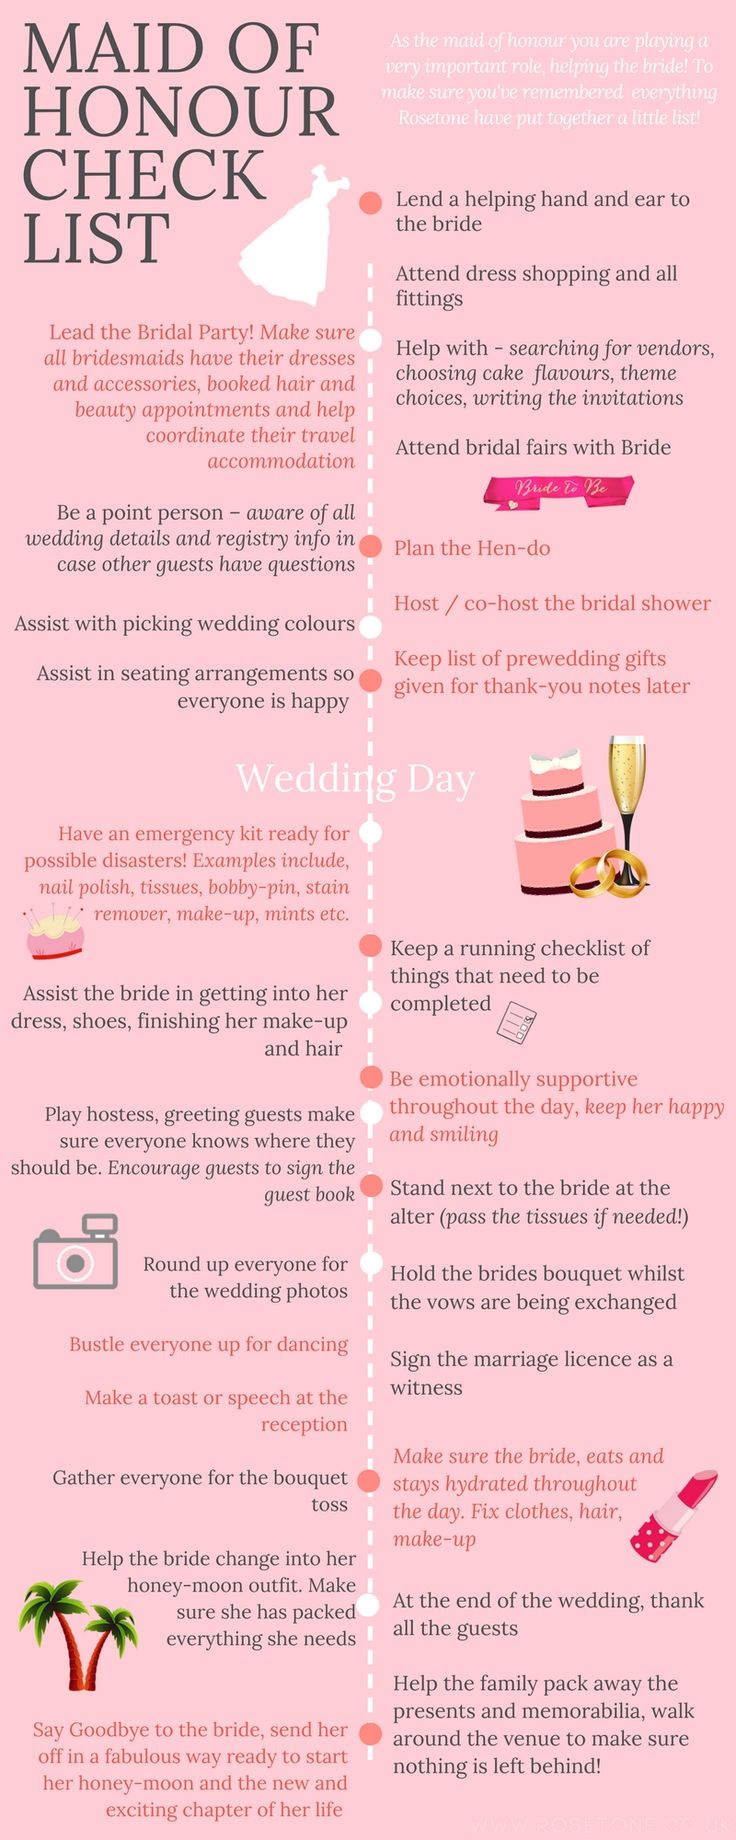 maid of honour checklist wedding ideas for your maid of honour if you